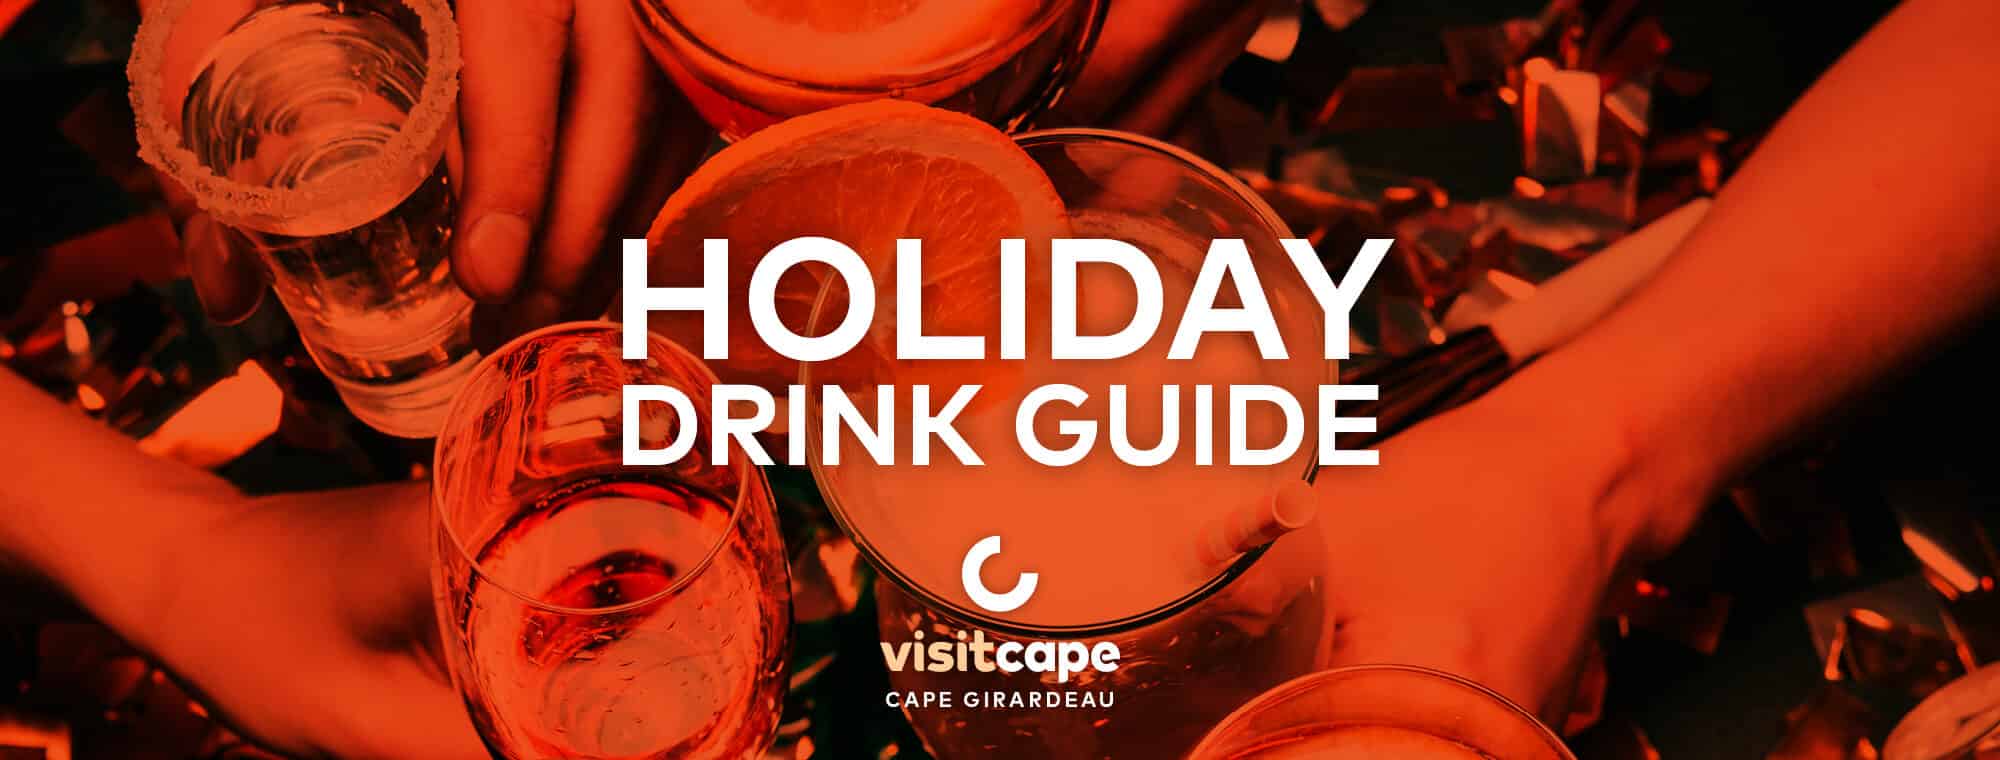 Cape Girardeau Holiday Drink Guide